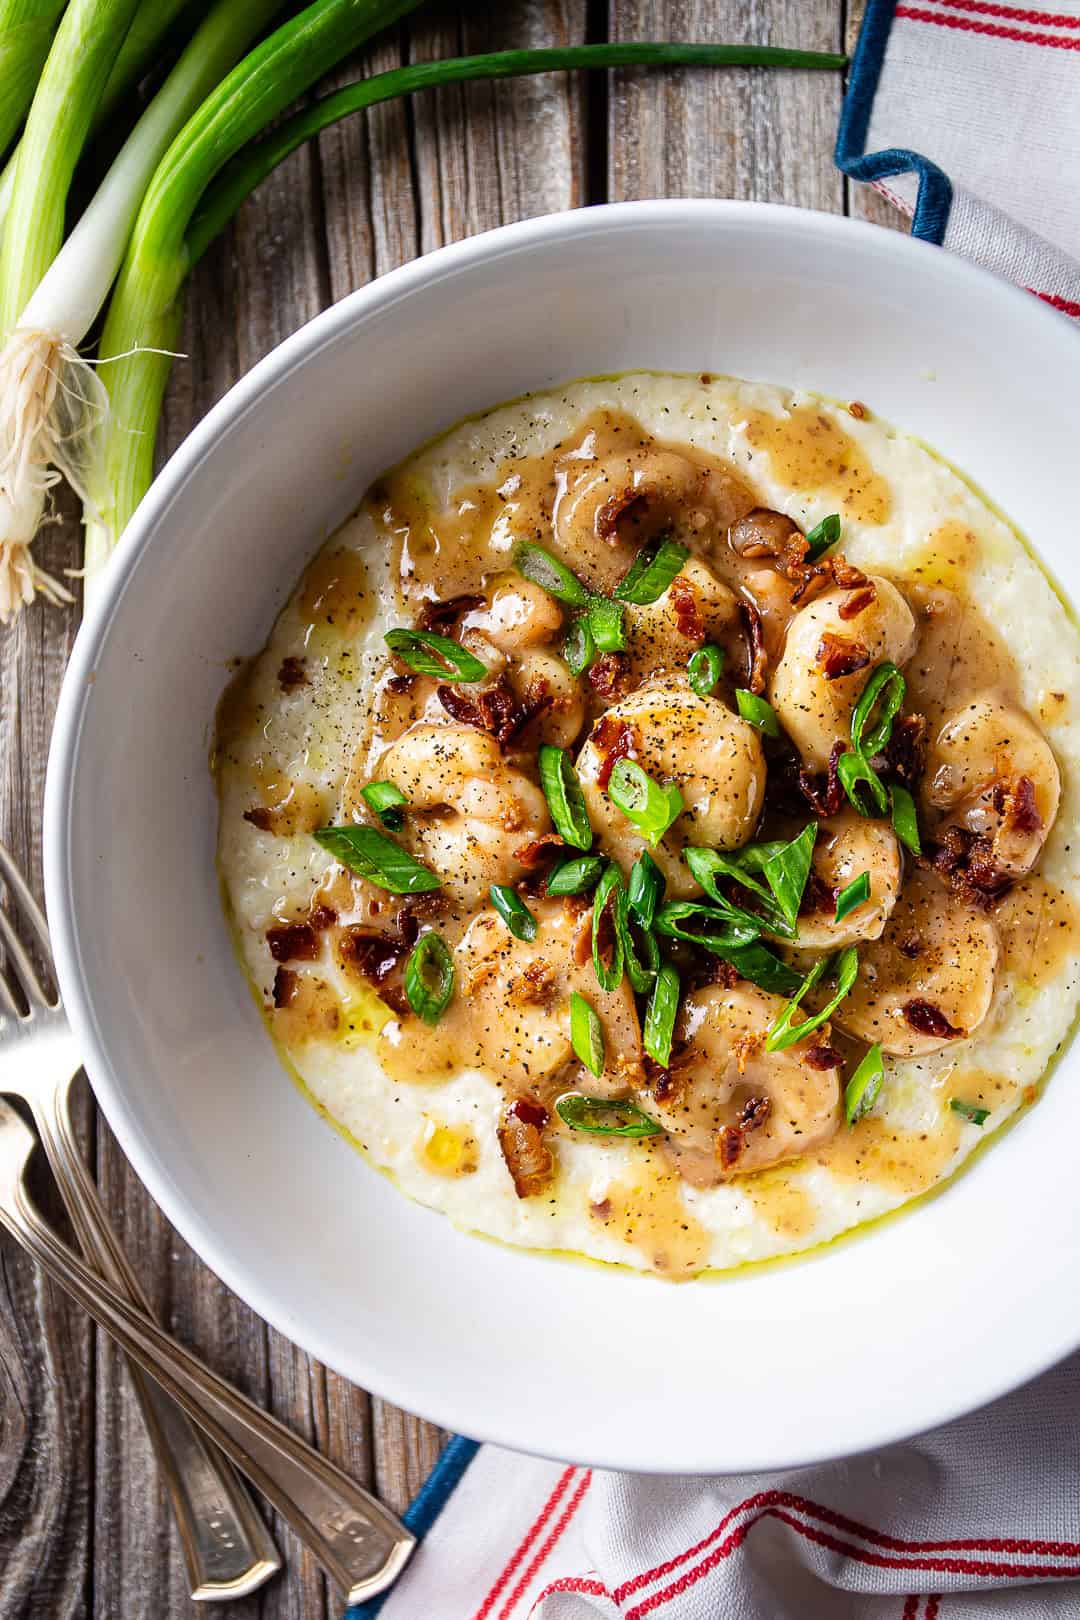 Recipe for shrimp and grits, cooked and served in bowls with green onions.